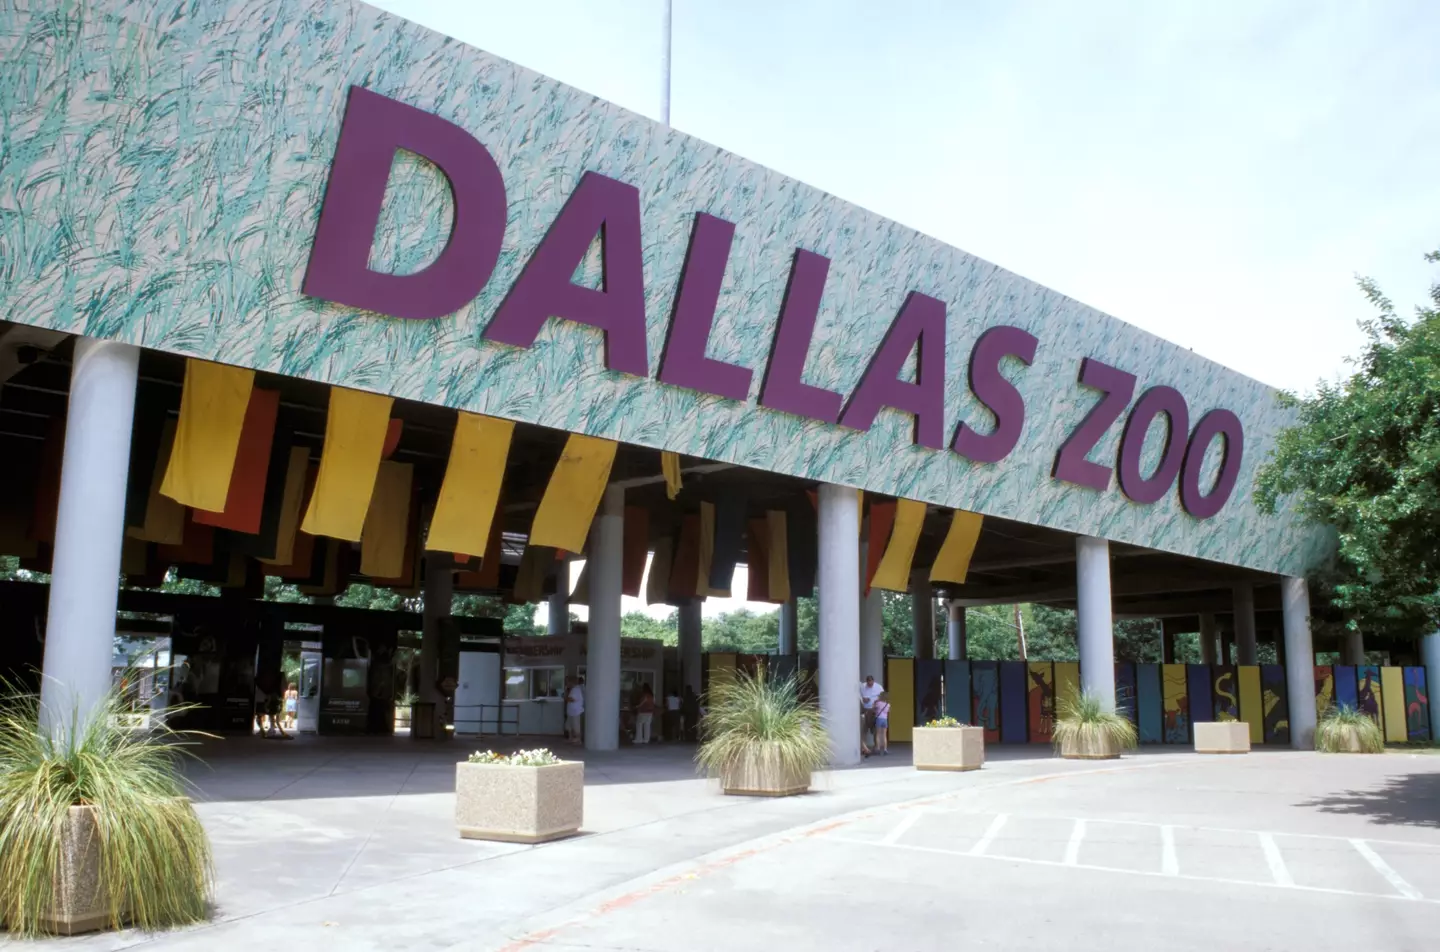 Dallas Zoo has had a string of unusual incidents in recent weeks.